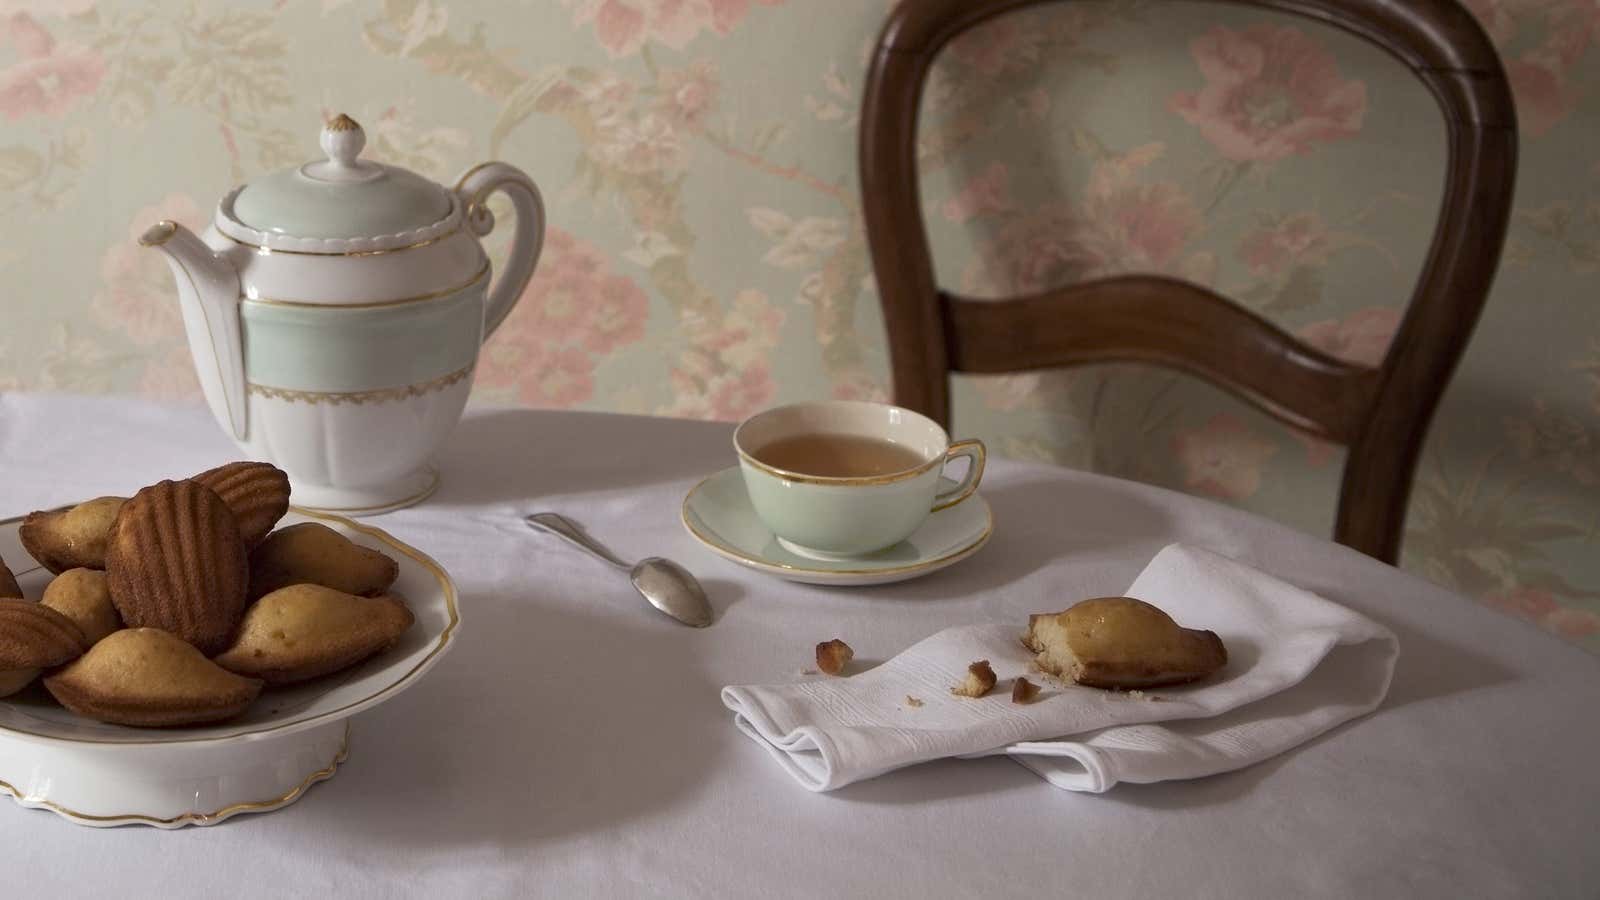 The famous madeleine scene from Marcel Proust’s “In Search of Lost Time.”